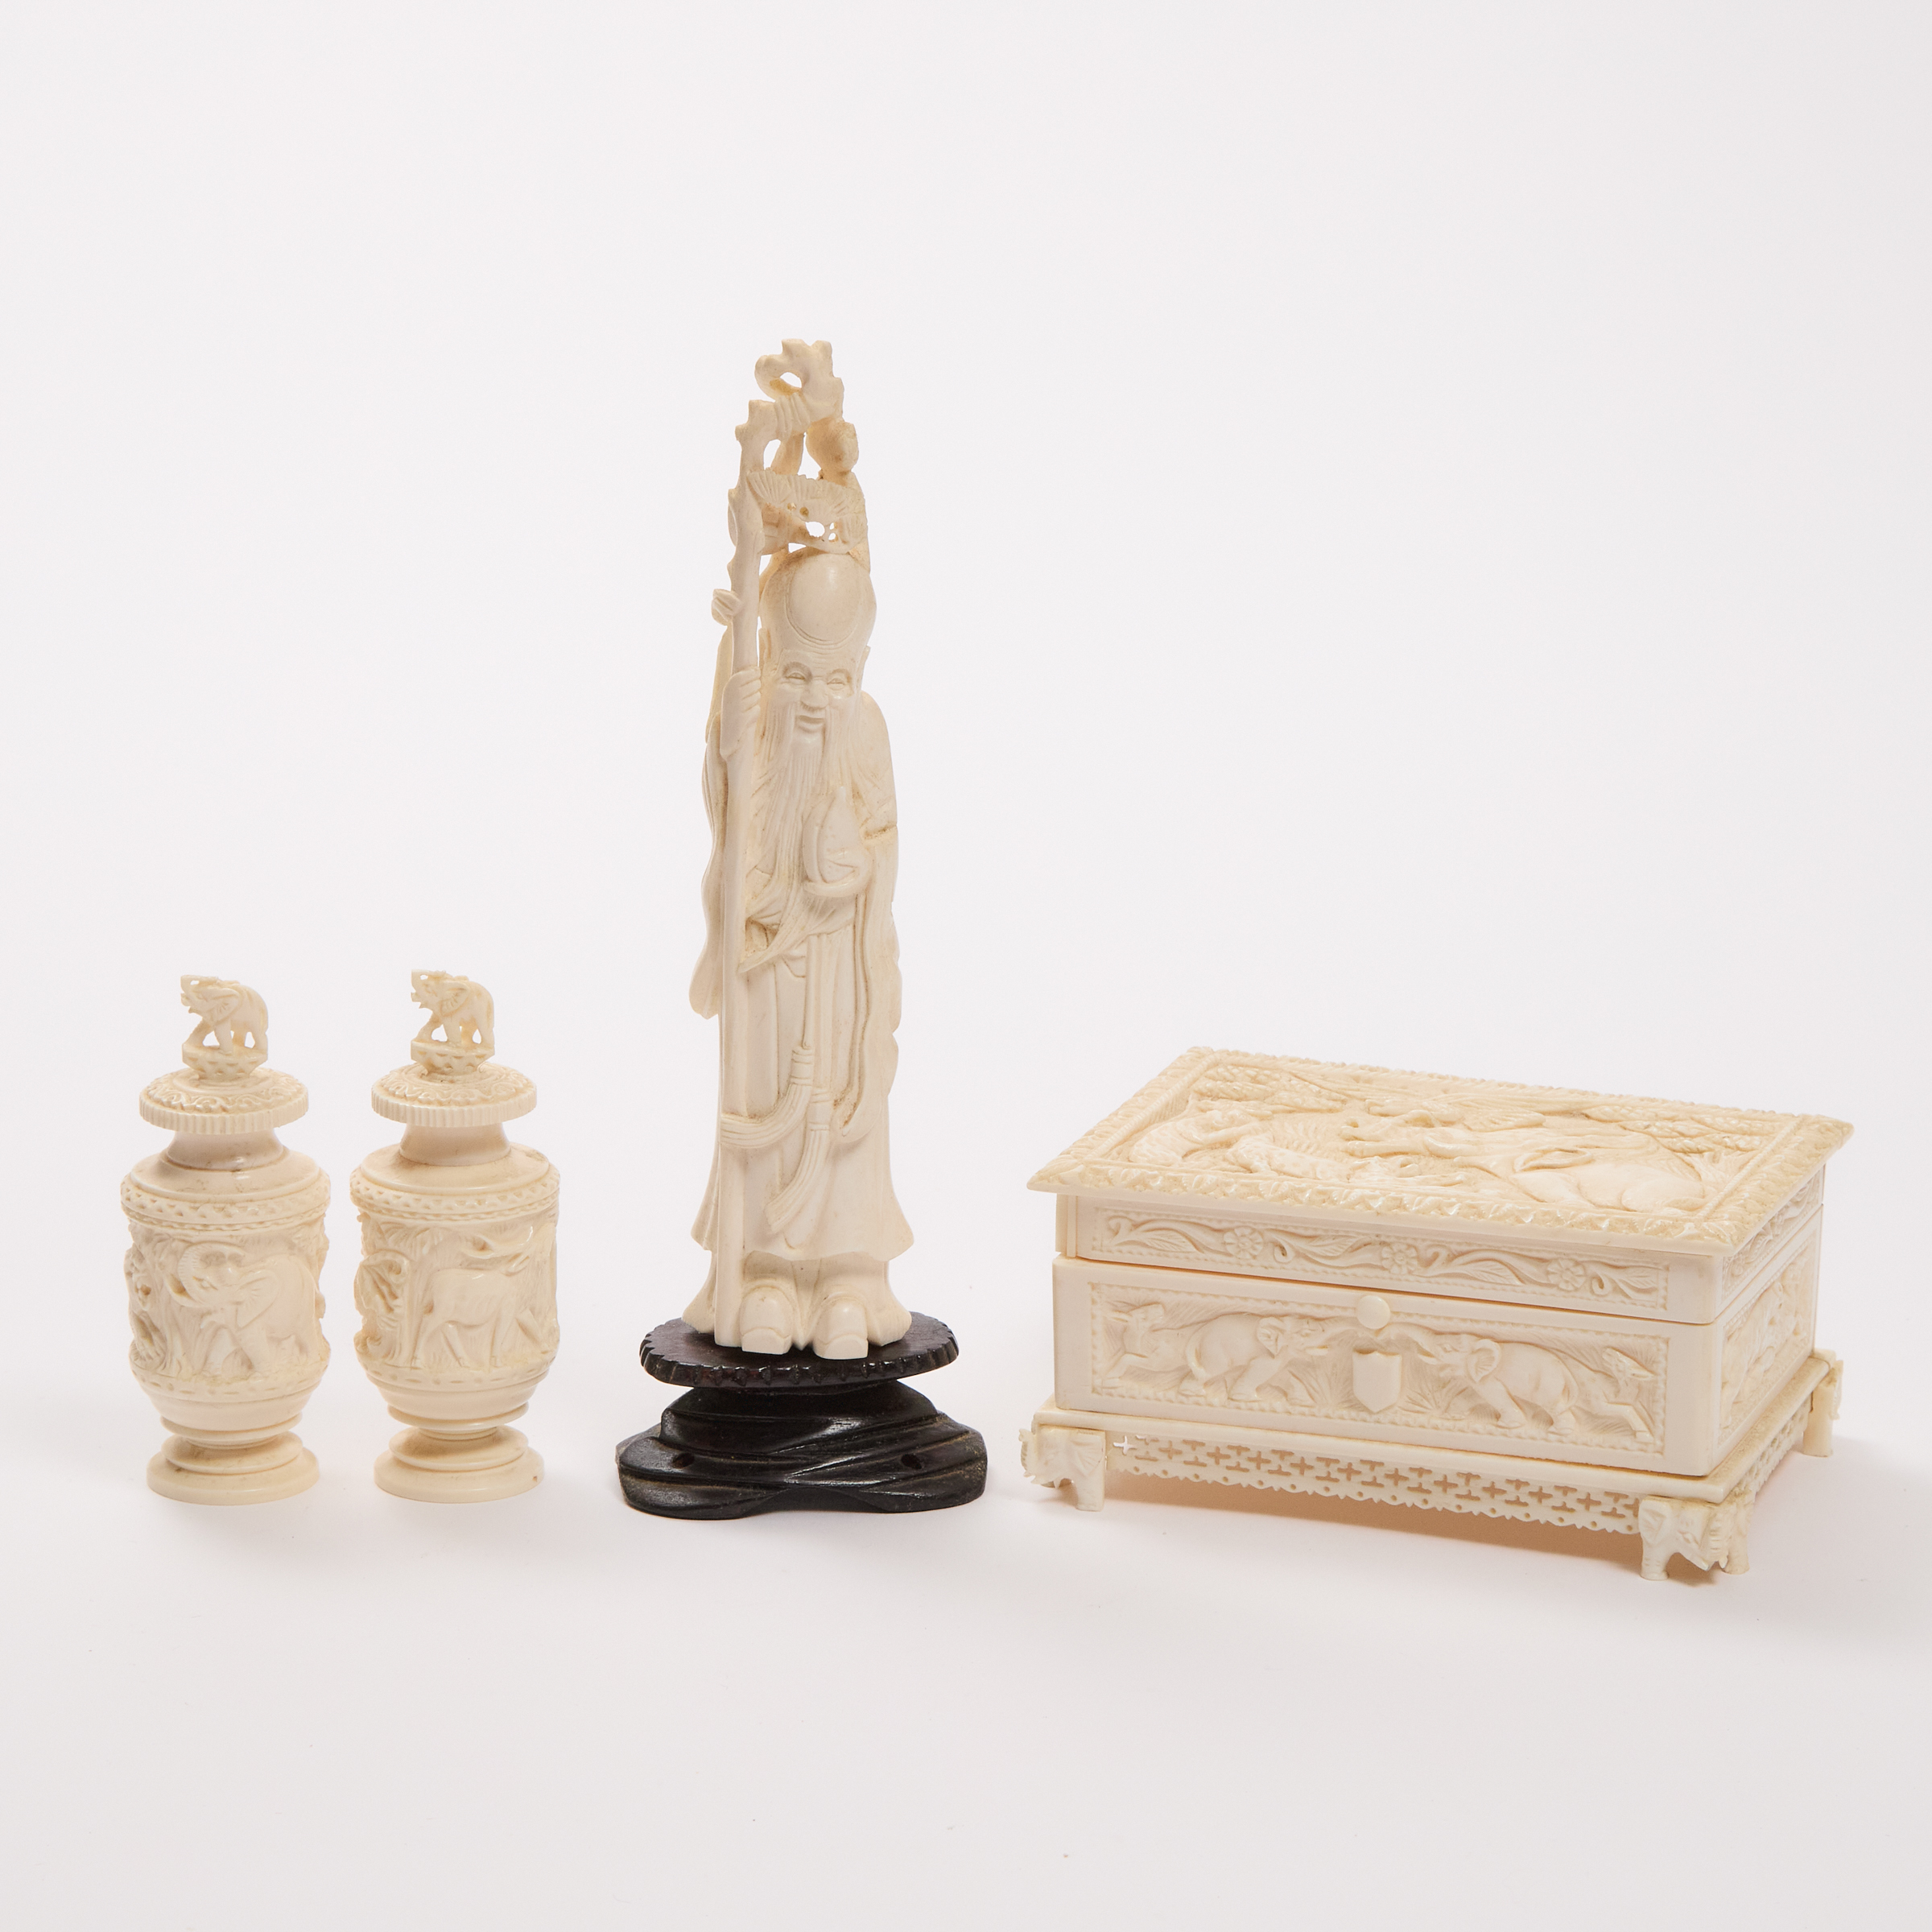 A Chinese Ivory Figure of Shoulao,